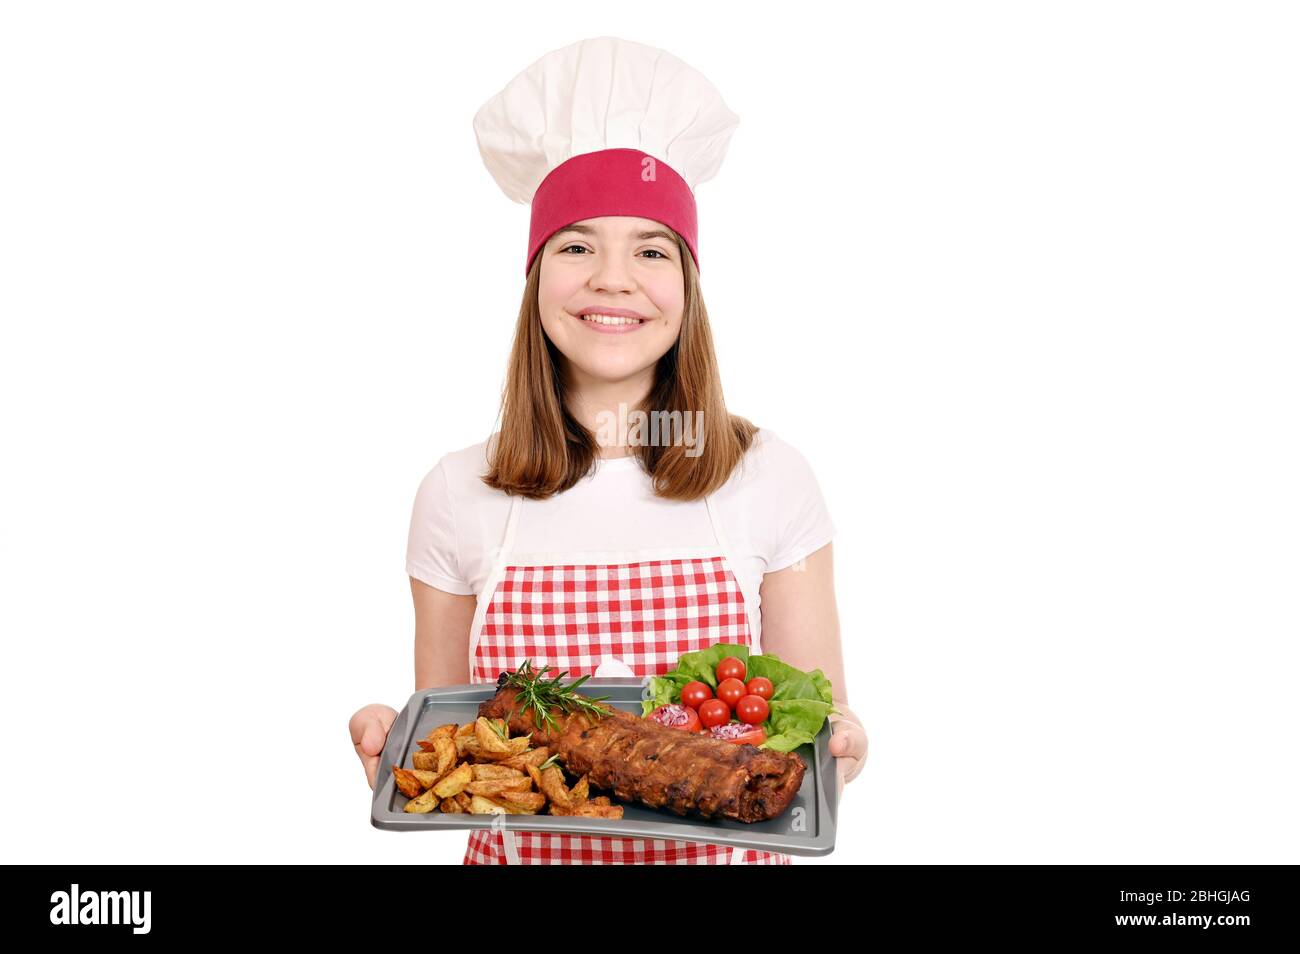 cook with pork ribs at plate Stock Photo